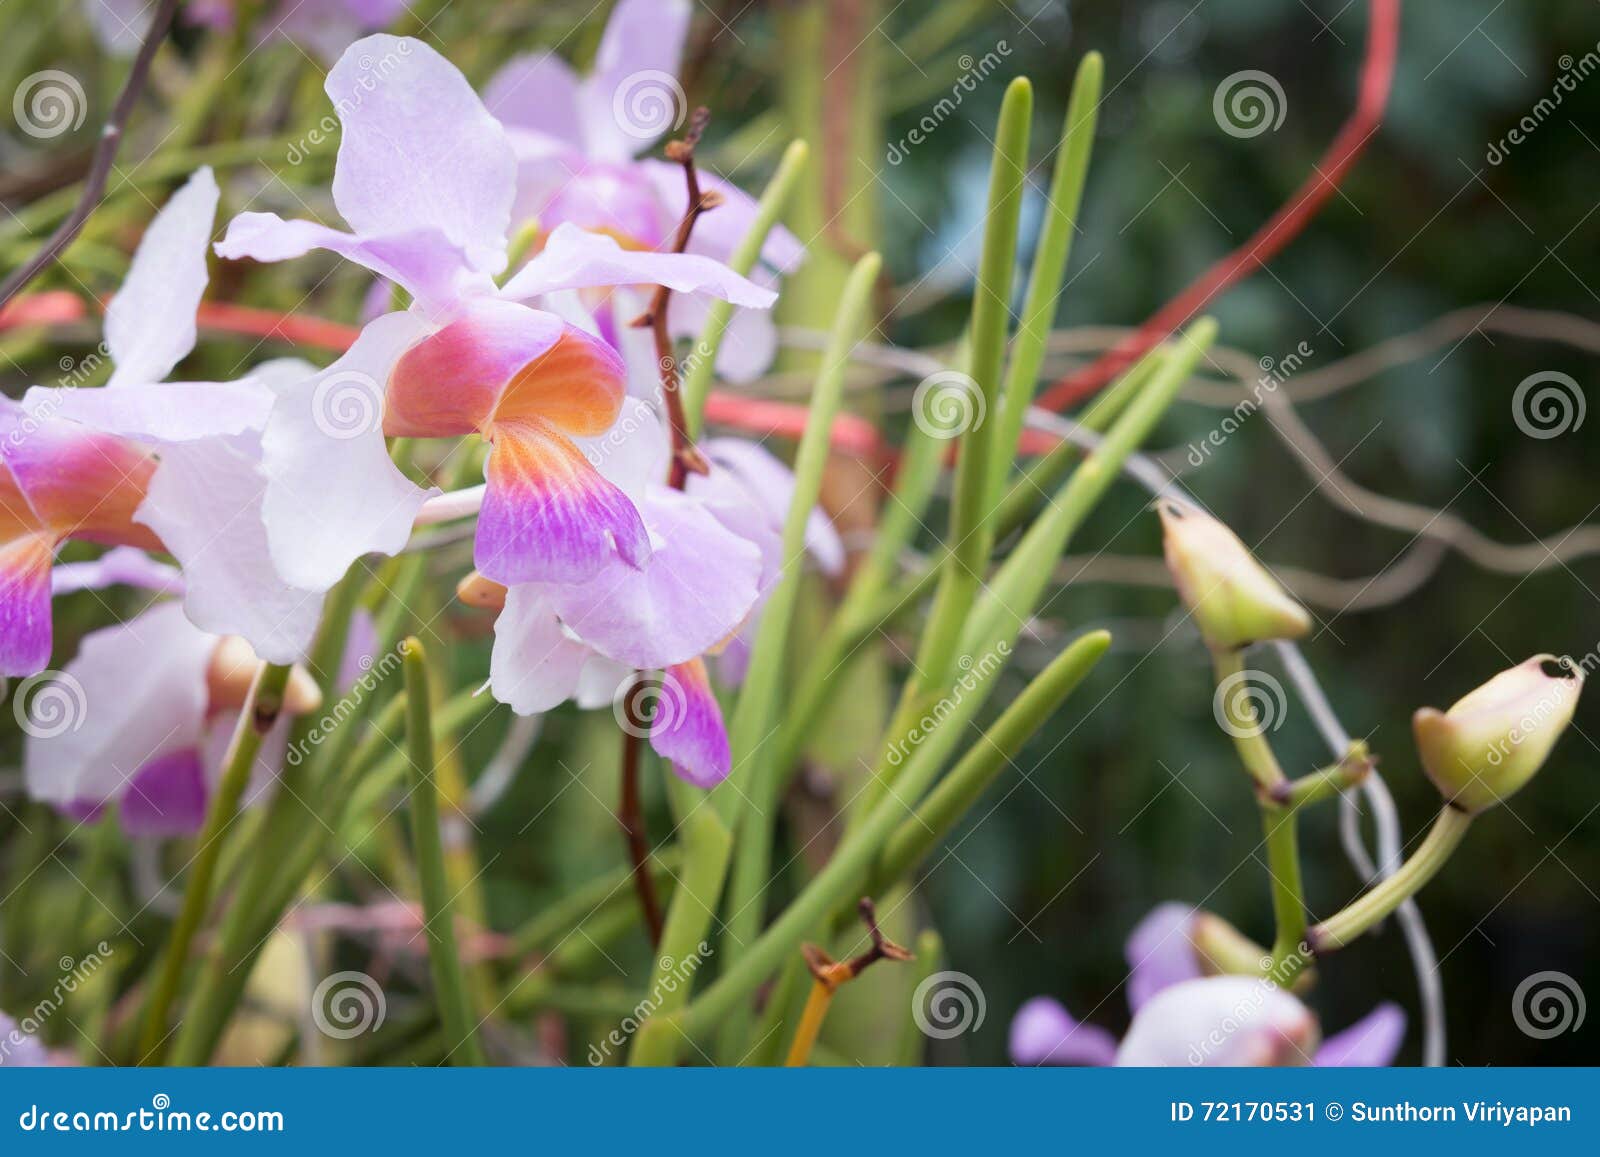 Beautiful Wild Flower Orchid,Vanda Teres Syn. Papilionanthe Teres ,Rare  Species of Wild Orchids Stock Image - Image of meadow, flora: 72170531